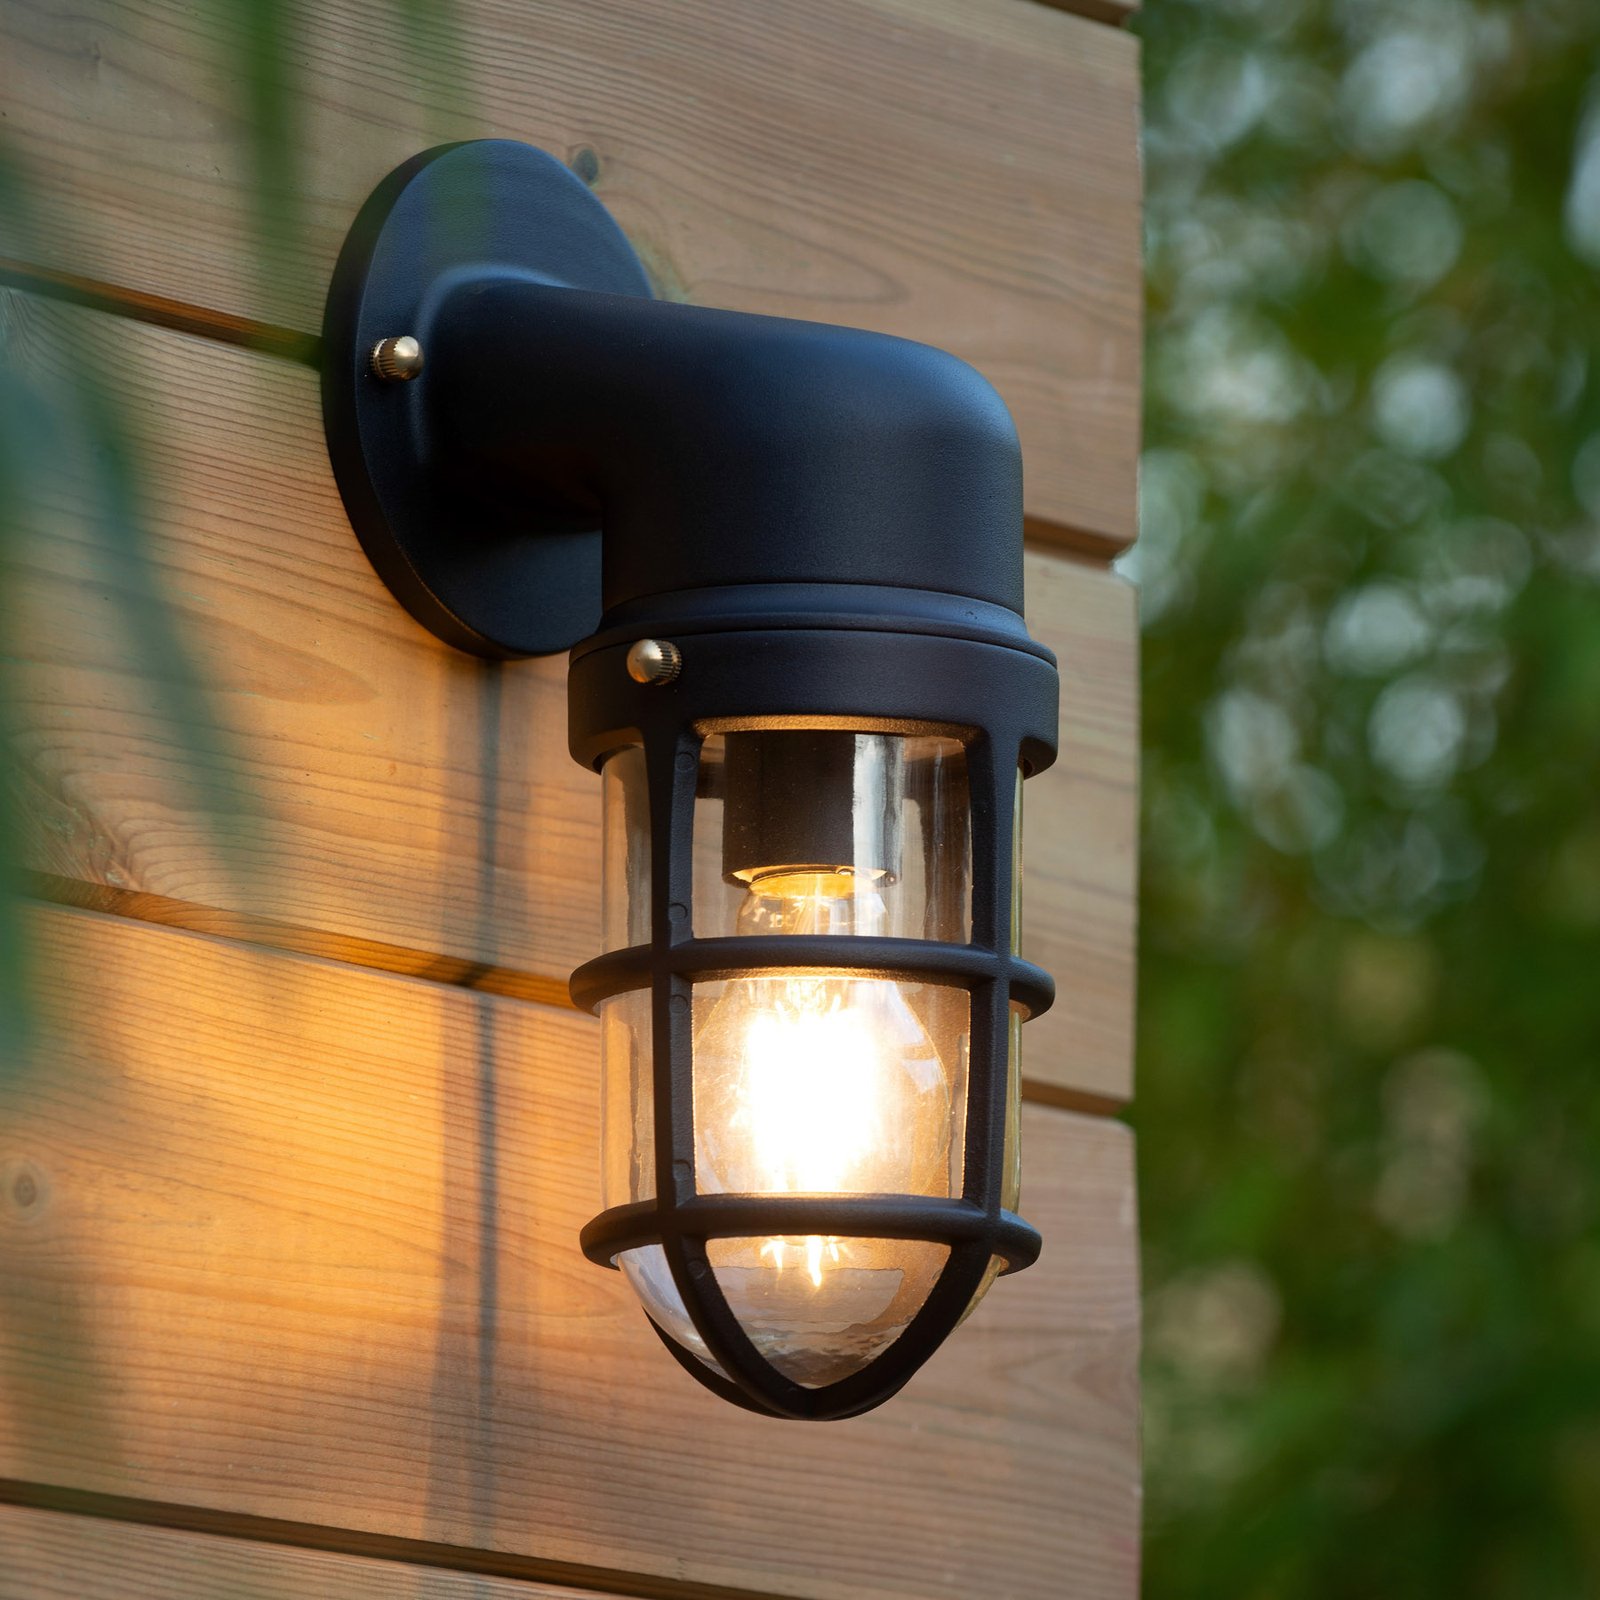 Dudley outdoor wall light, projecting at the bottom, black